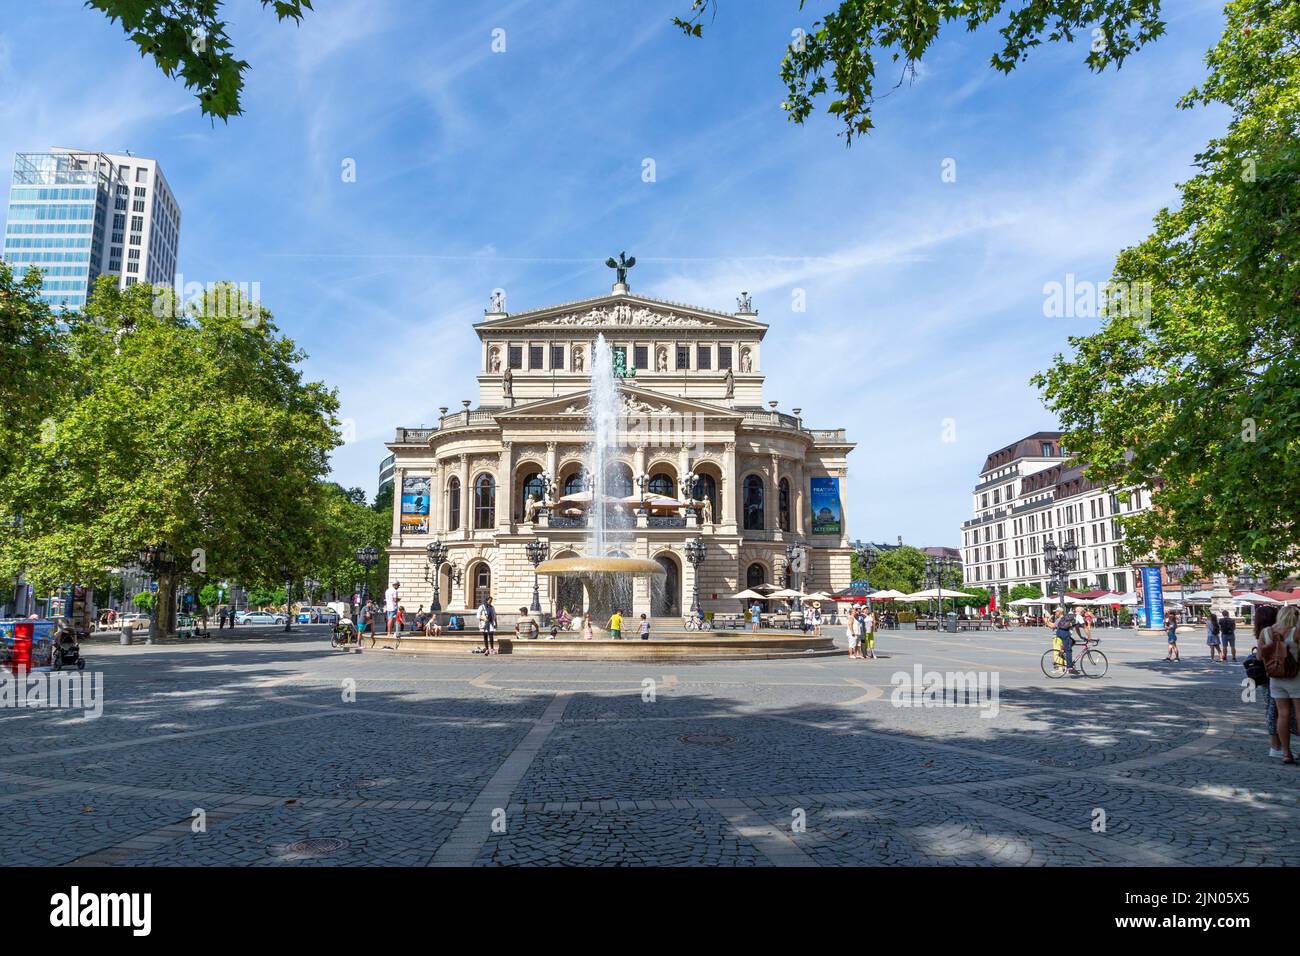 Frankfurt, Germany - August 2, 2022: The Alte Oper on Opernplatz in Frankfurt am Main is a concert and event house. It was built from 1873 to 1880 as Stock Photo